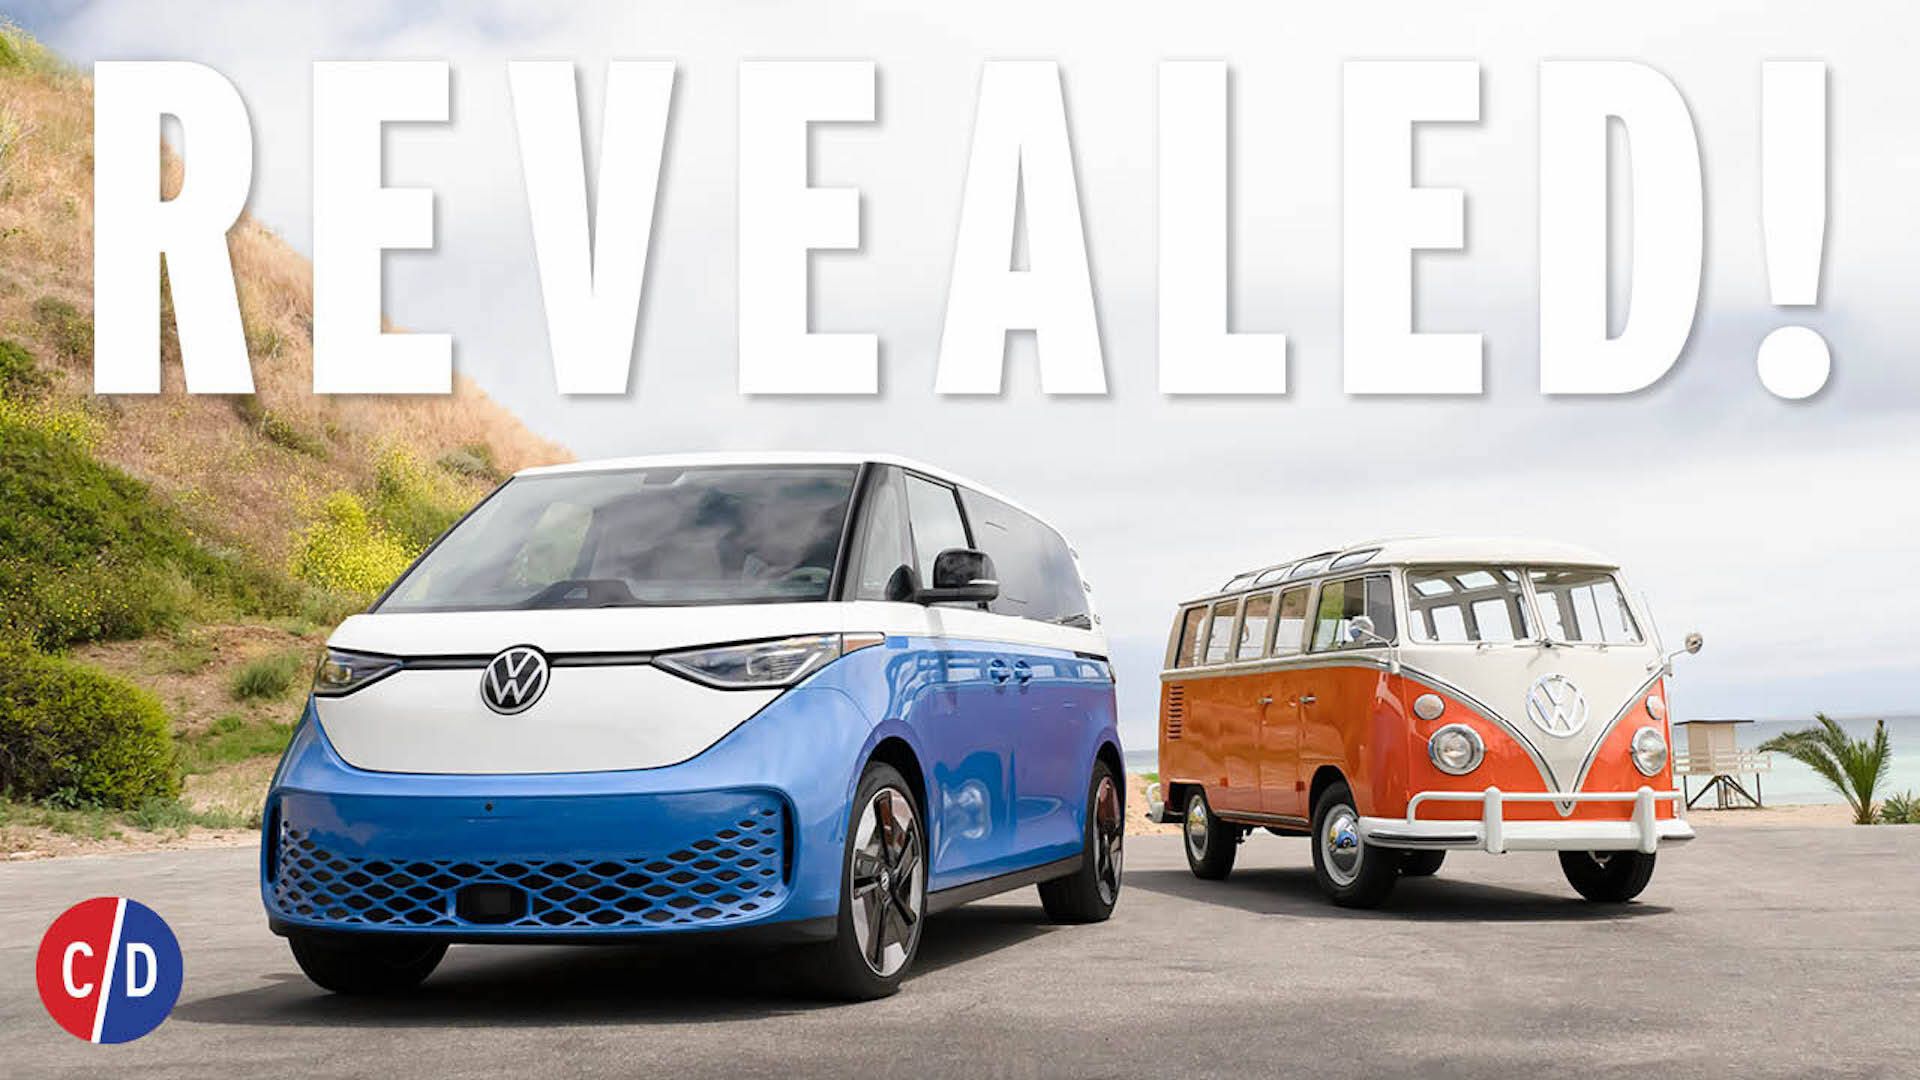 The Volkswagen van is back. It will be electric and self-driving